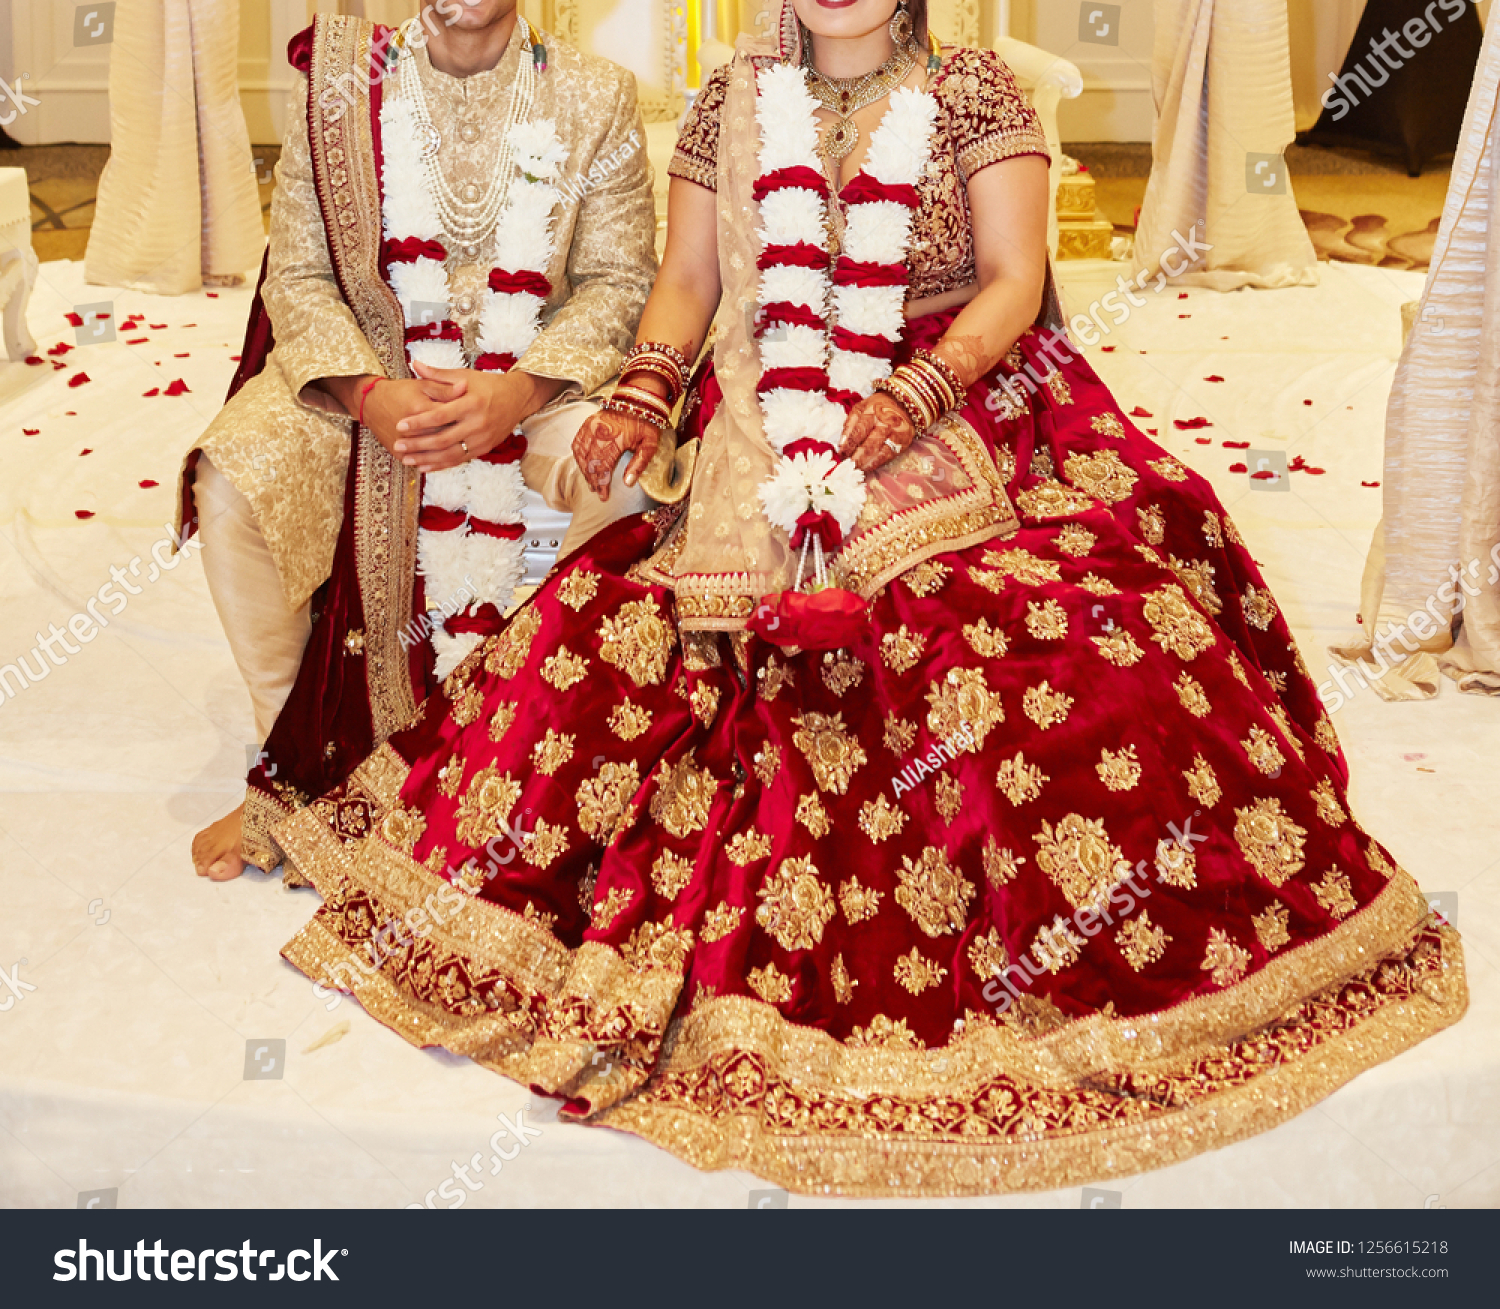 indian wedding dress for bride and groom